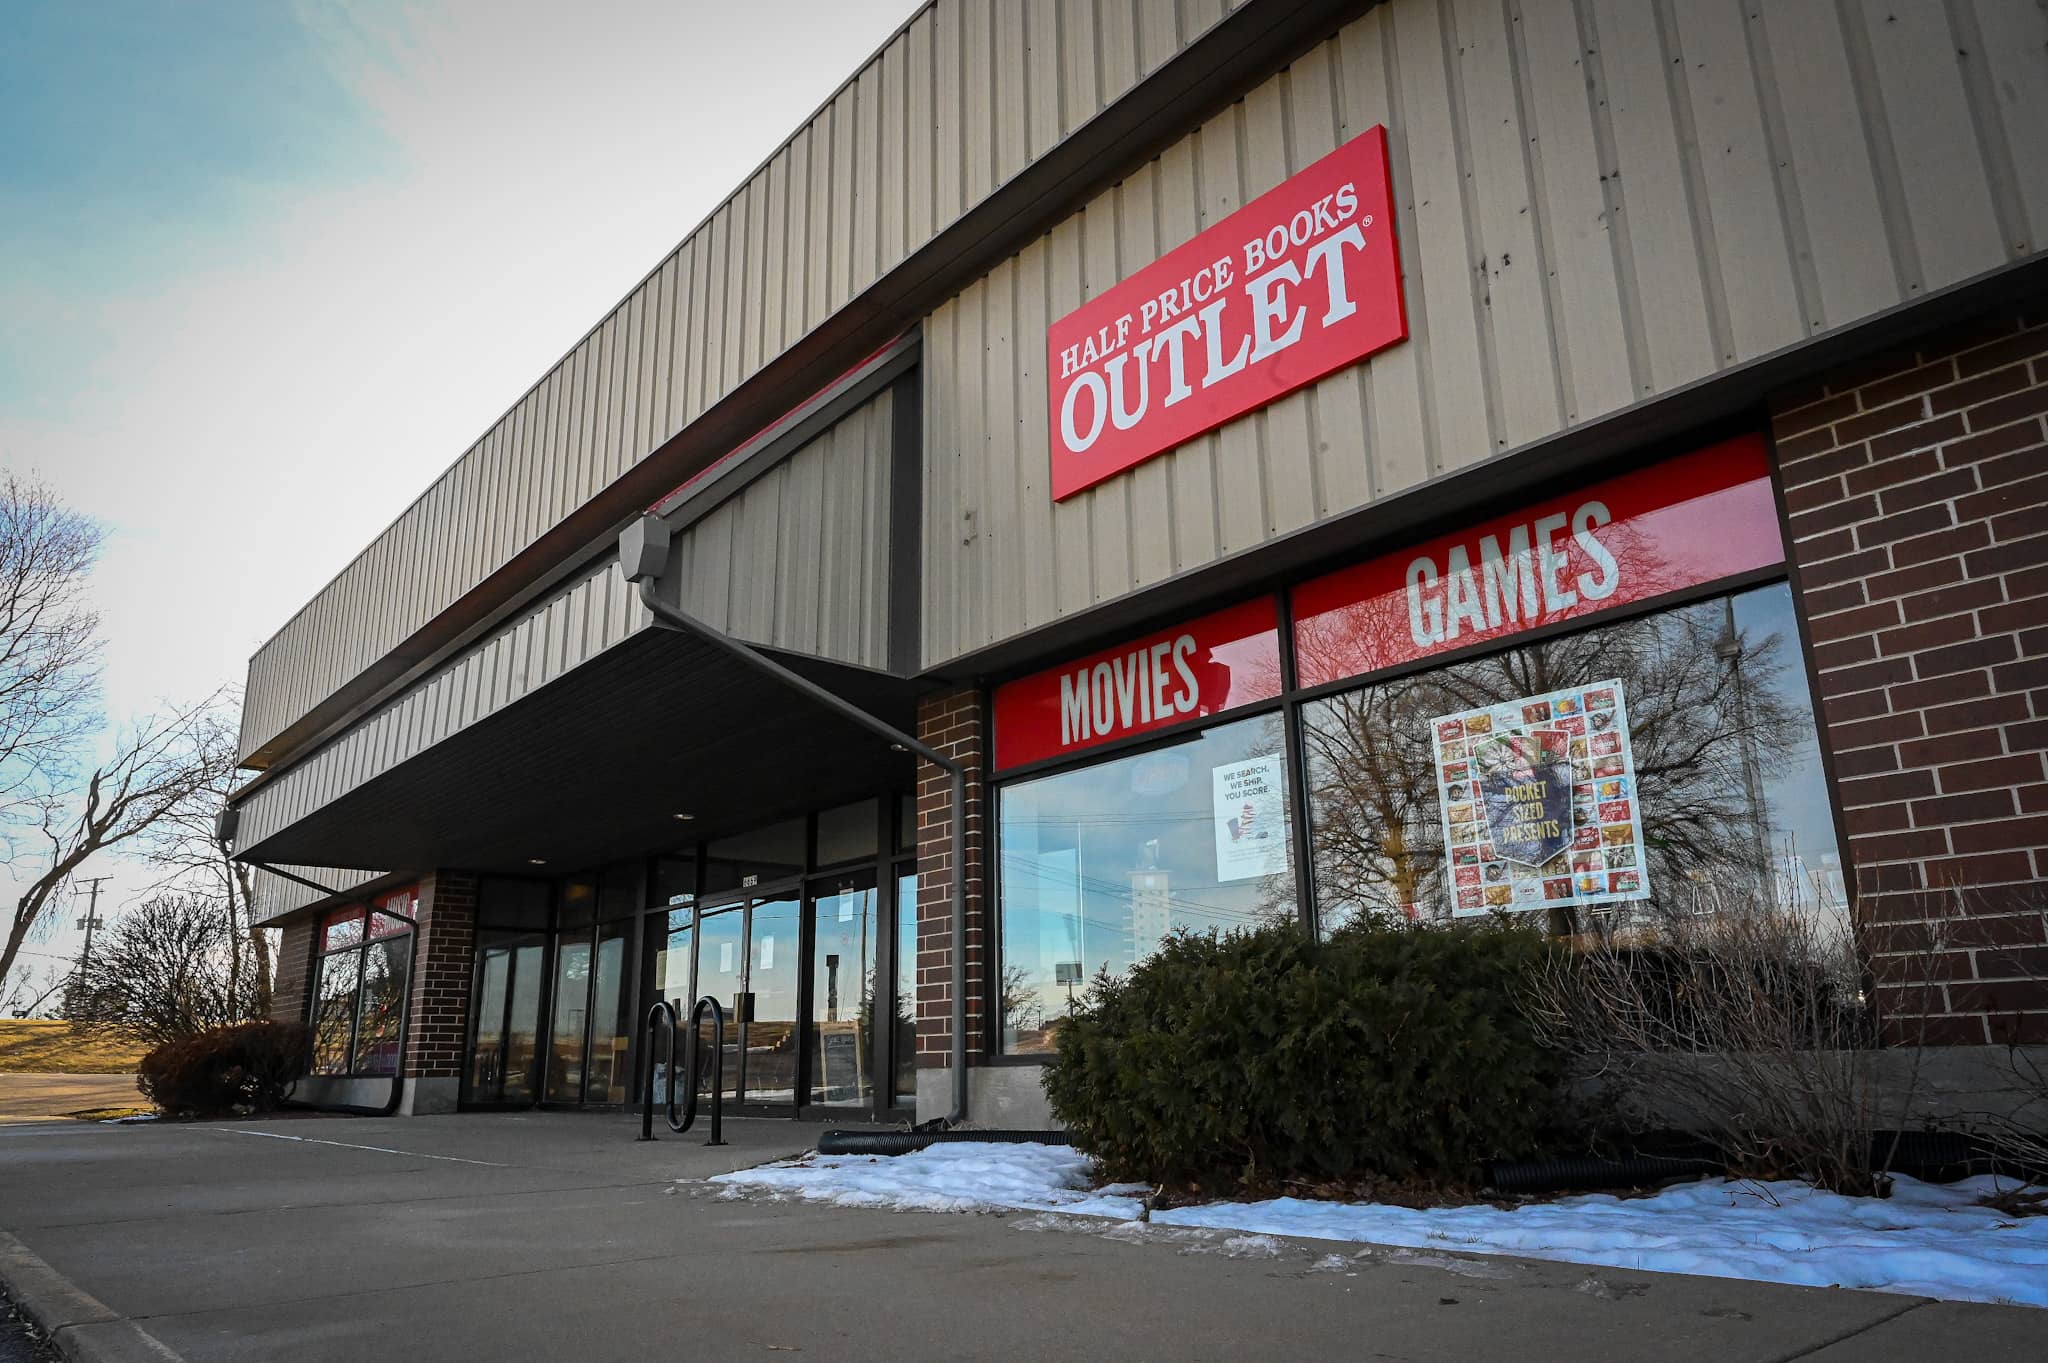 Half Price Books Outlet in Rockford